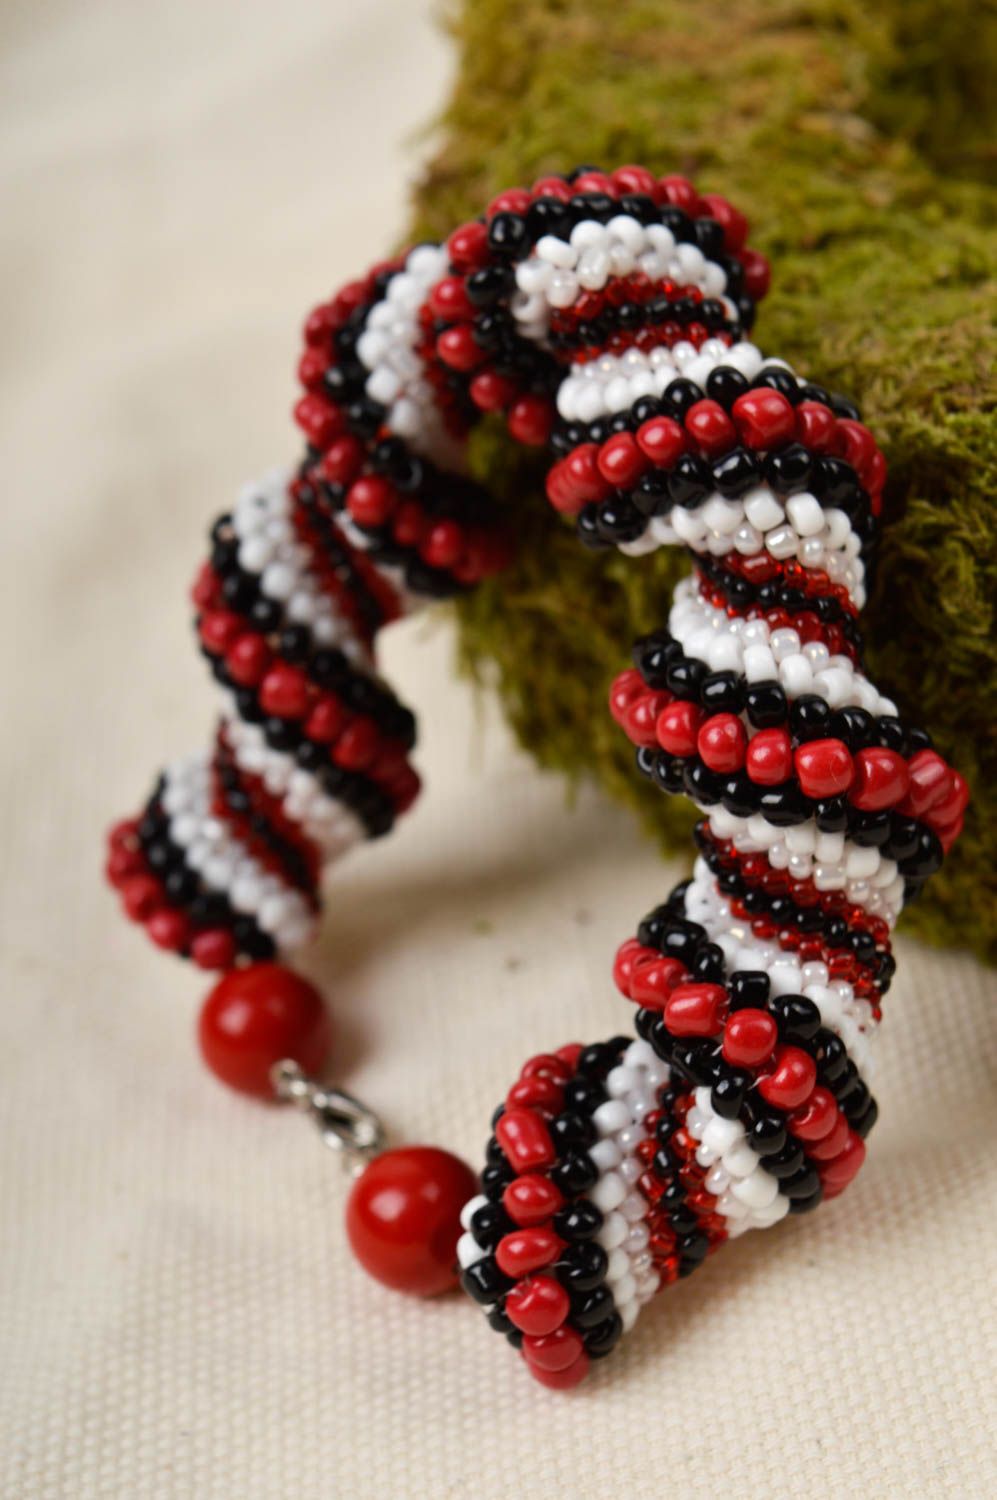 White, black, and red beads wrist adjustable bracelet on the chain photo 1